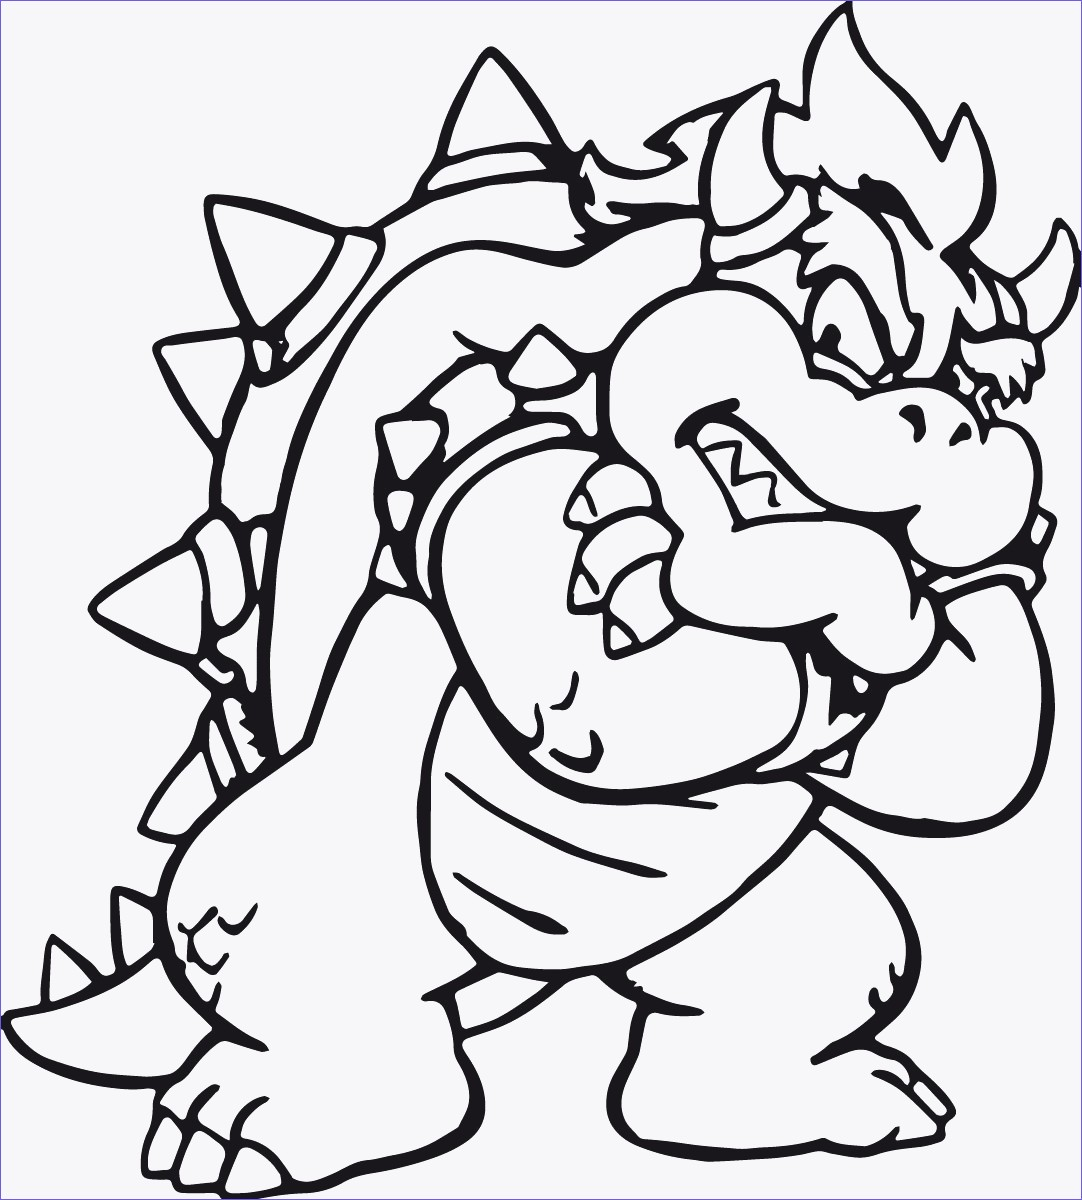 Yoshi Coloring Pages To Print Coloring Ideas Ba Yoshi Coloring Pages Ideas Extraordinary Mario